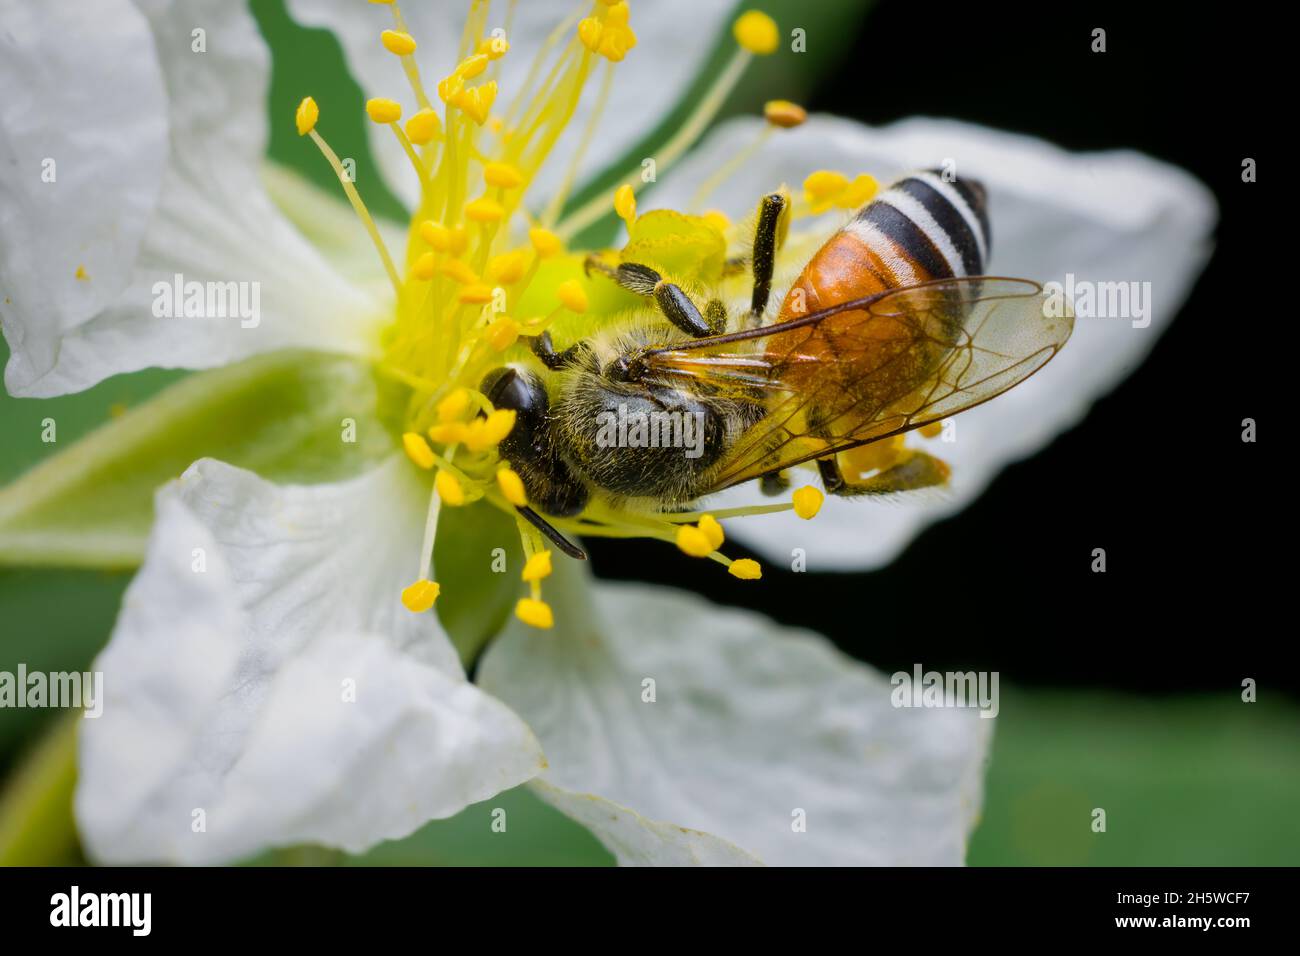 Honey bee getting nectar from jamaican cherry flower. Used selective focus. Stock Photo